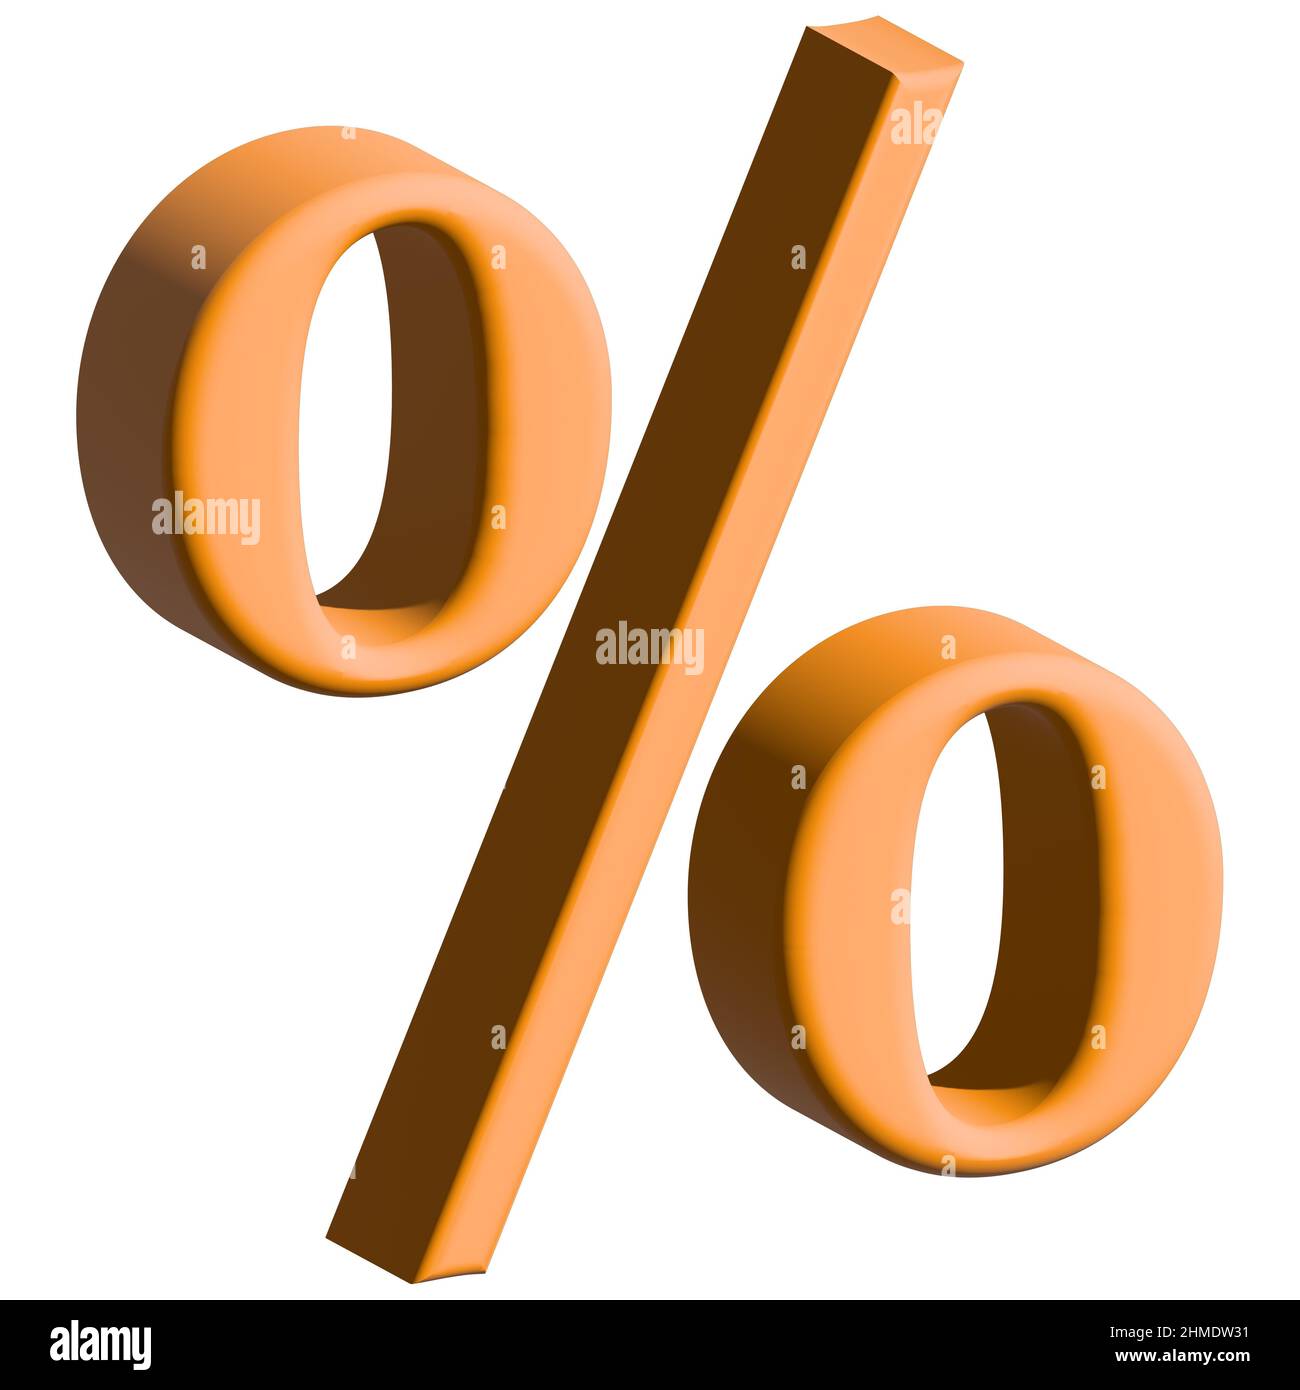 Percentage sign on white background. Business concept. 3d illustration Stock Photo